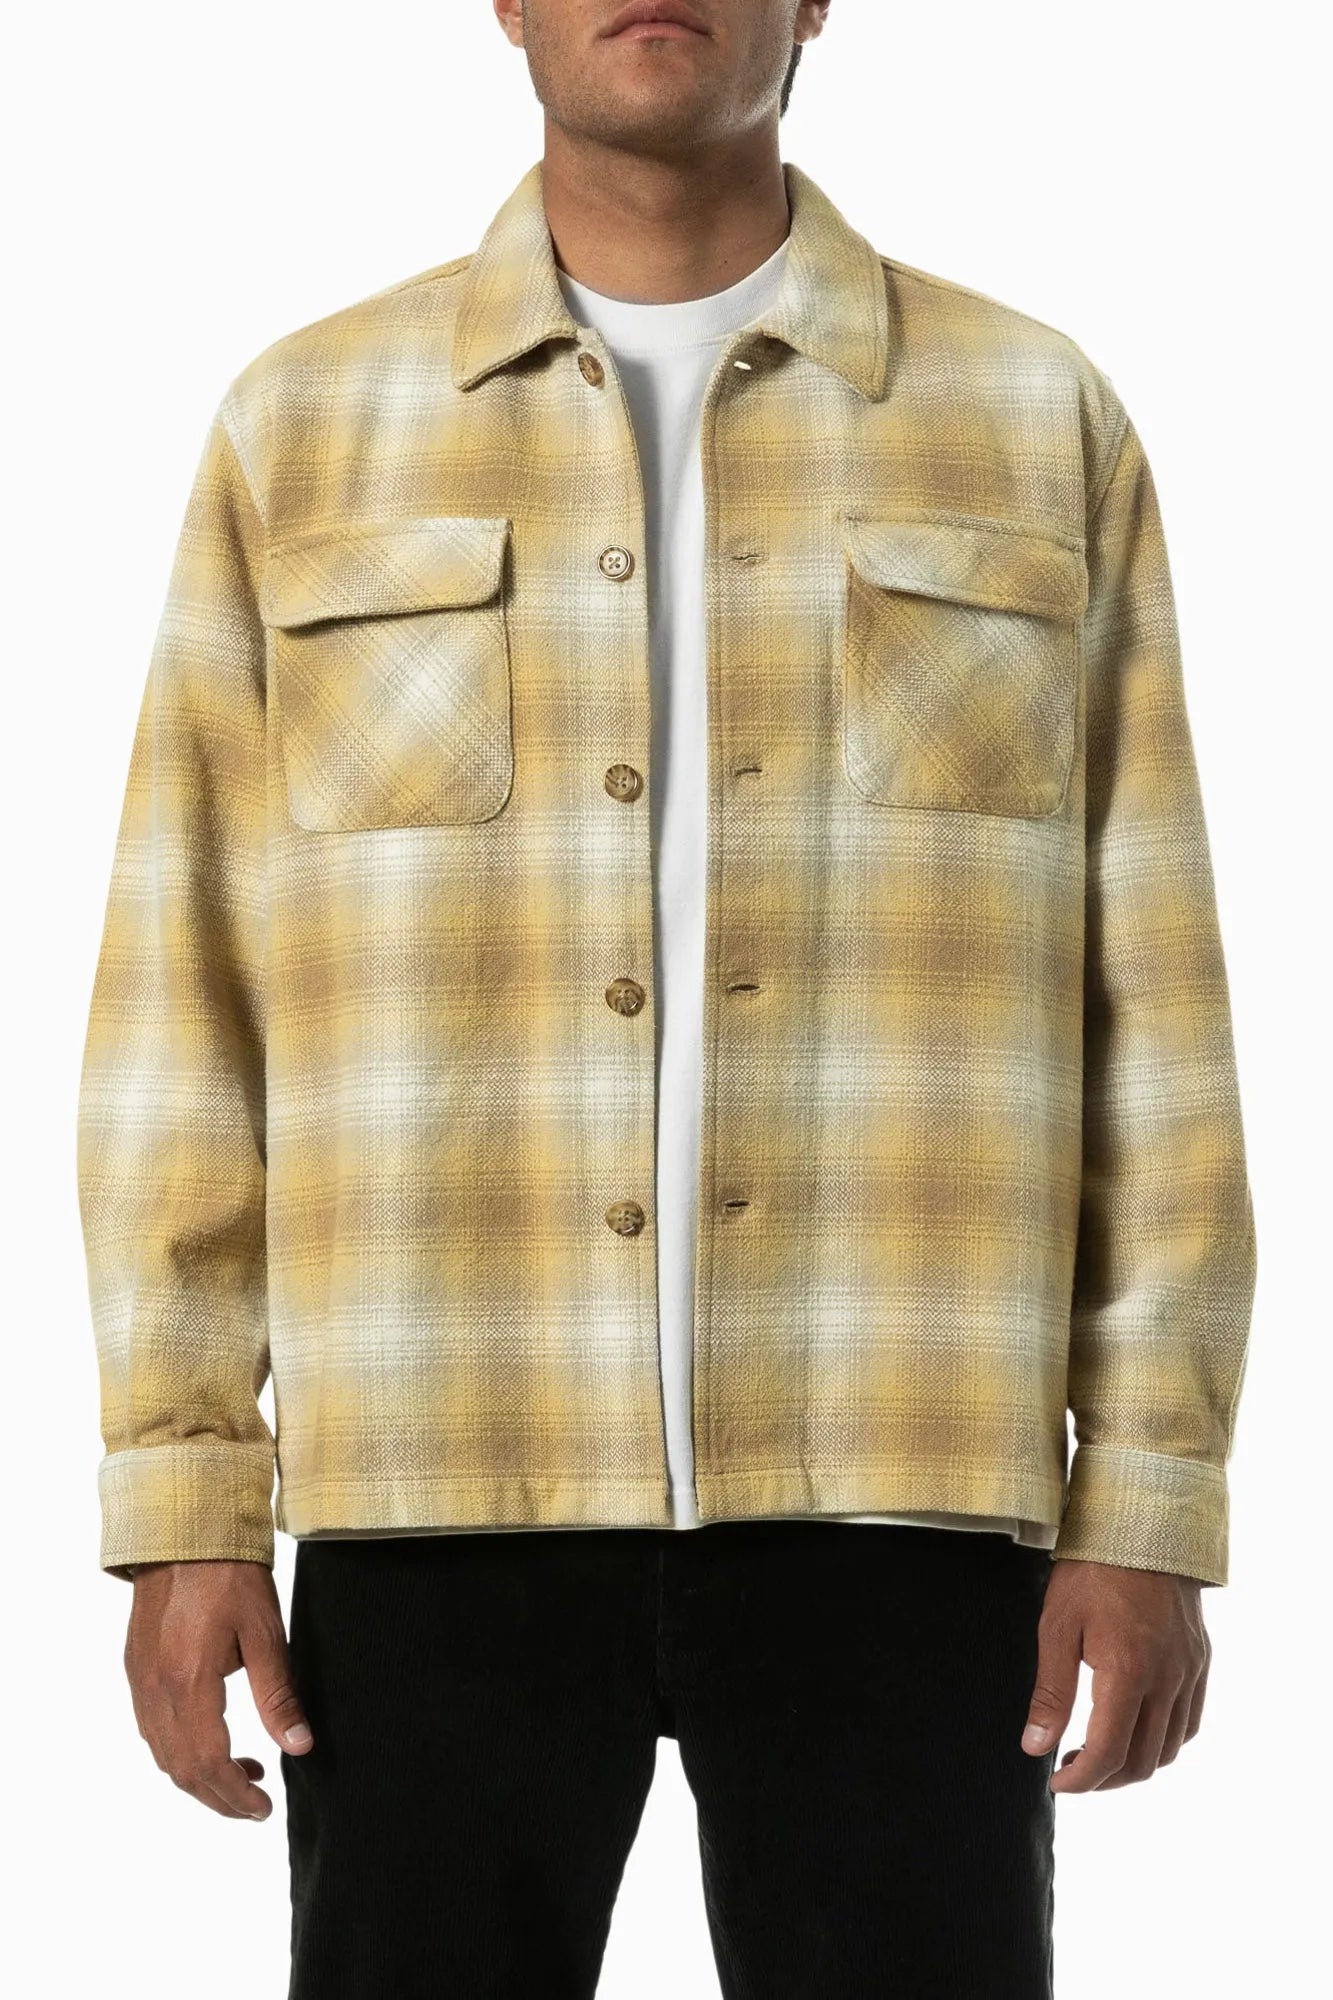 Katahdin Quilted Flannel Shirt Jacket – Golden Road Crossing